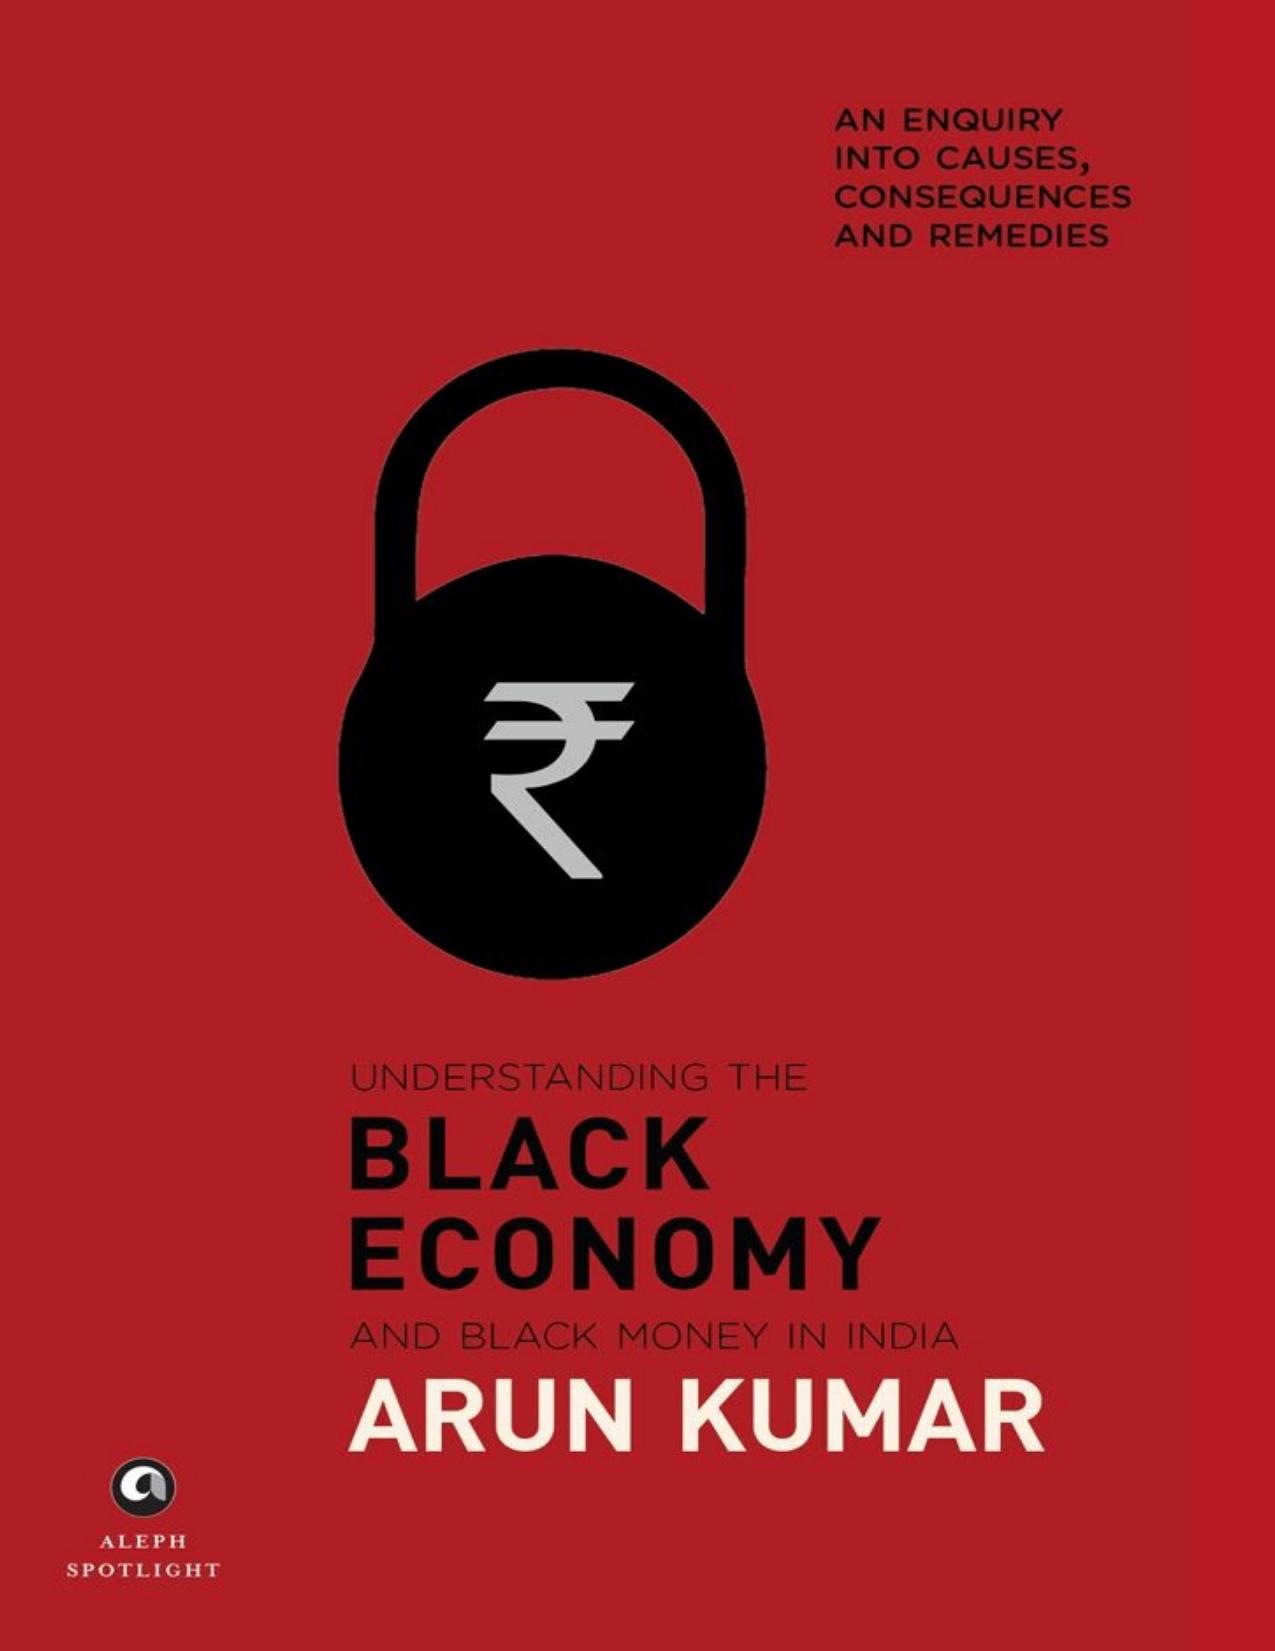 Understanding the Black Economy and Black Money in India: An Enquiry into Causes, Consequences & Remedies by Arun Kumar